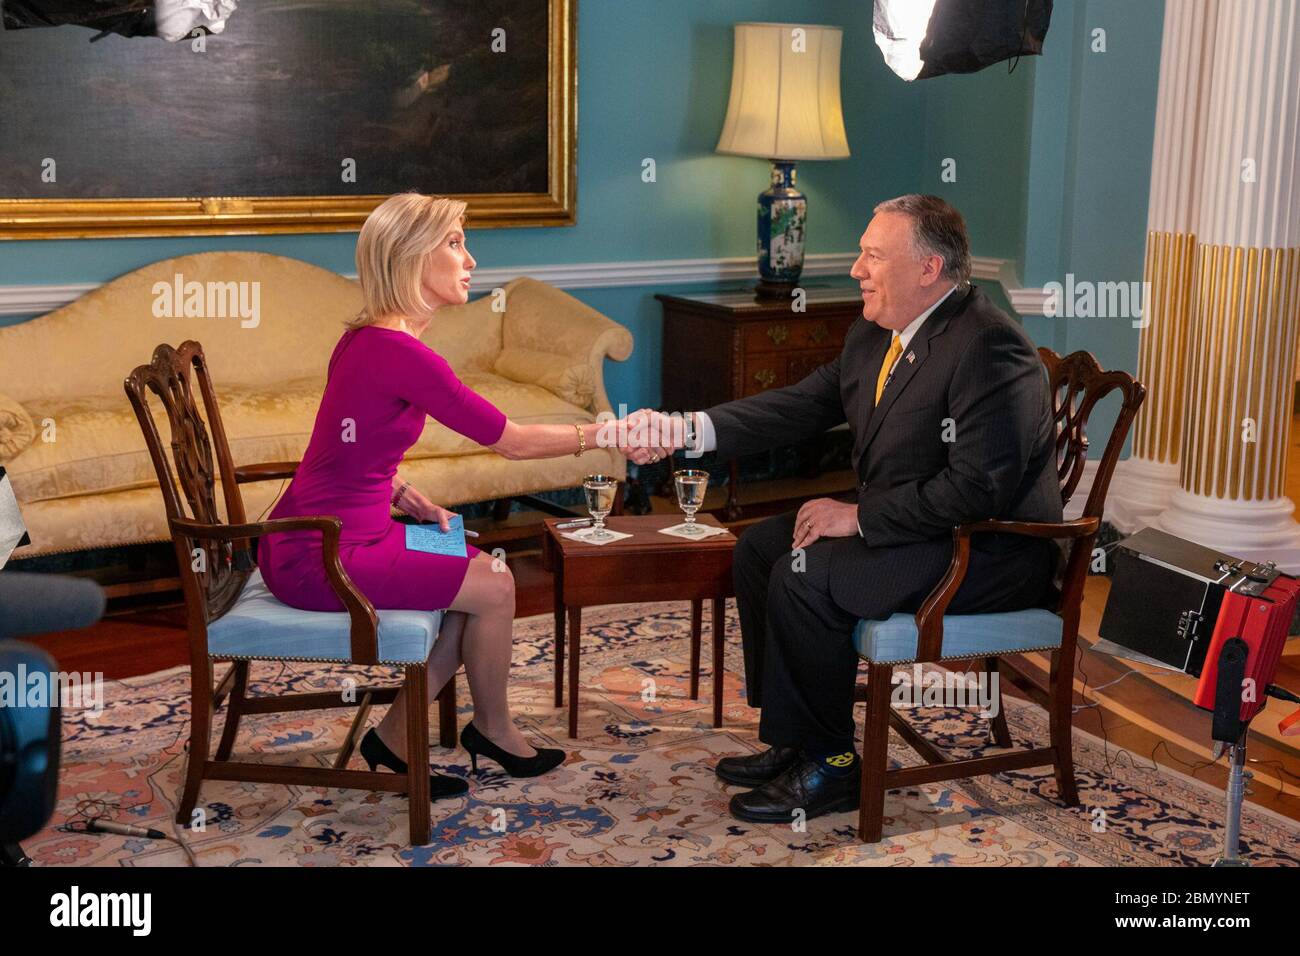 Secretary Pompeo Participates in an Interview with Fox Secretary of State Michael R. Pompeo participates in an interview with Fox's Laura Ingraham, at the Department of State, in Washington D.C., on January 9, 2020. Stock Photo